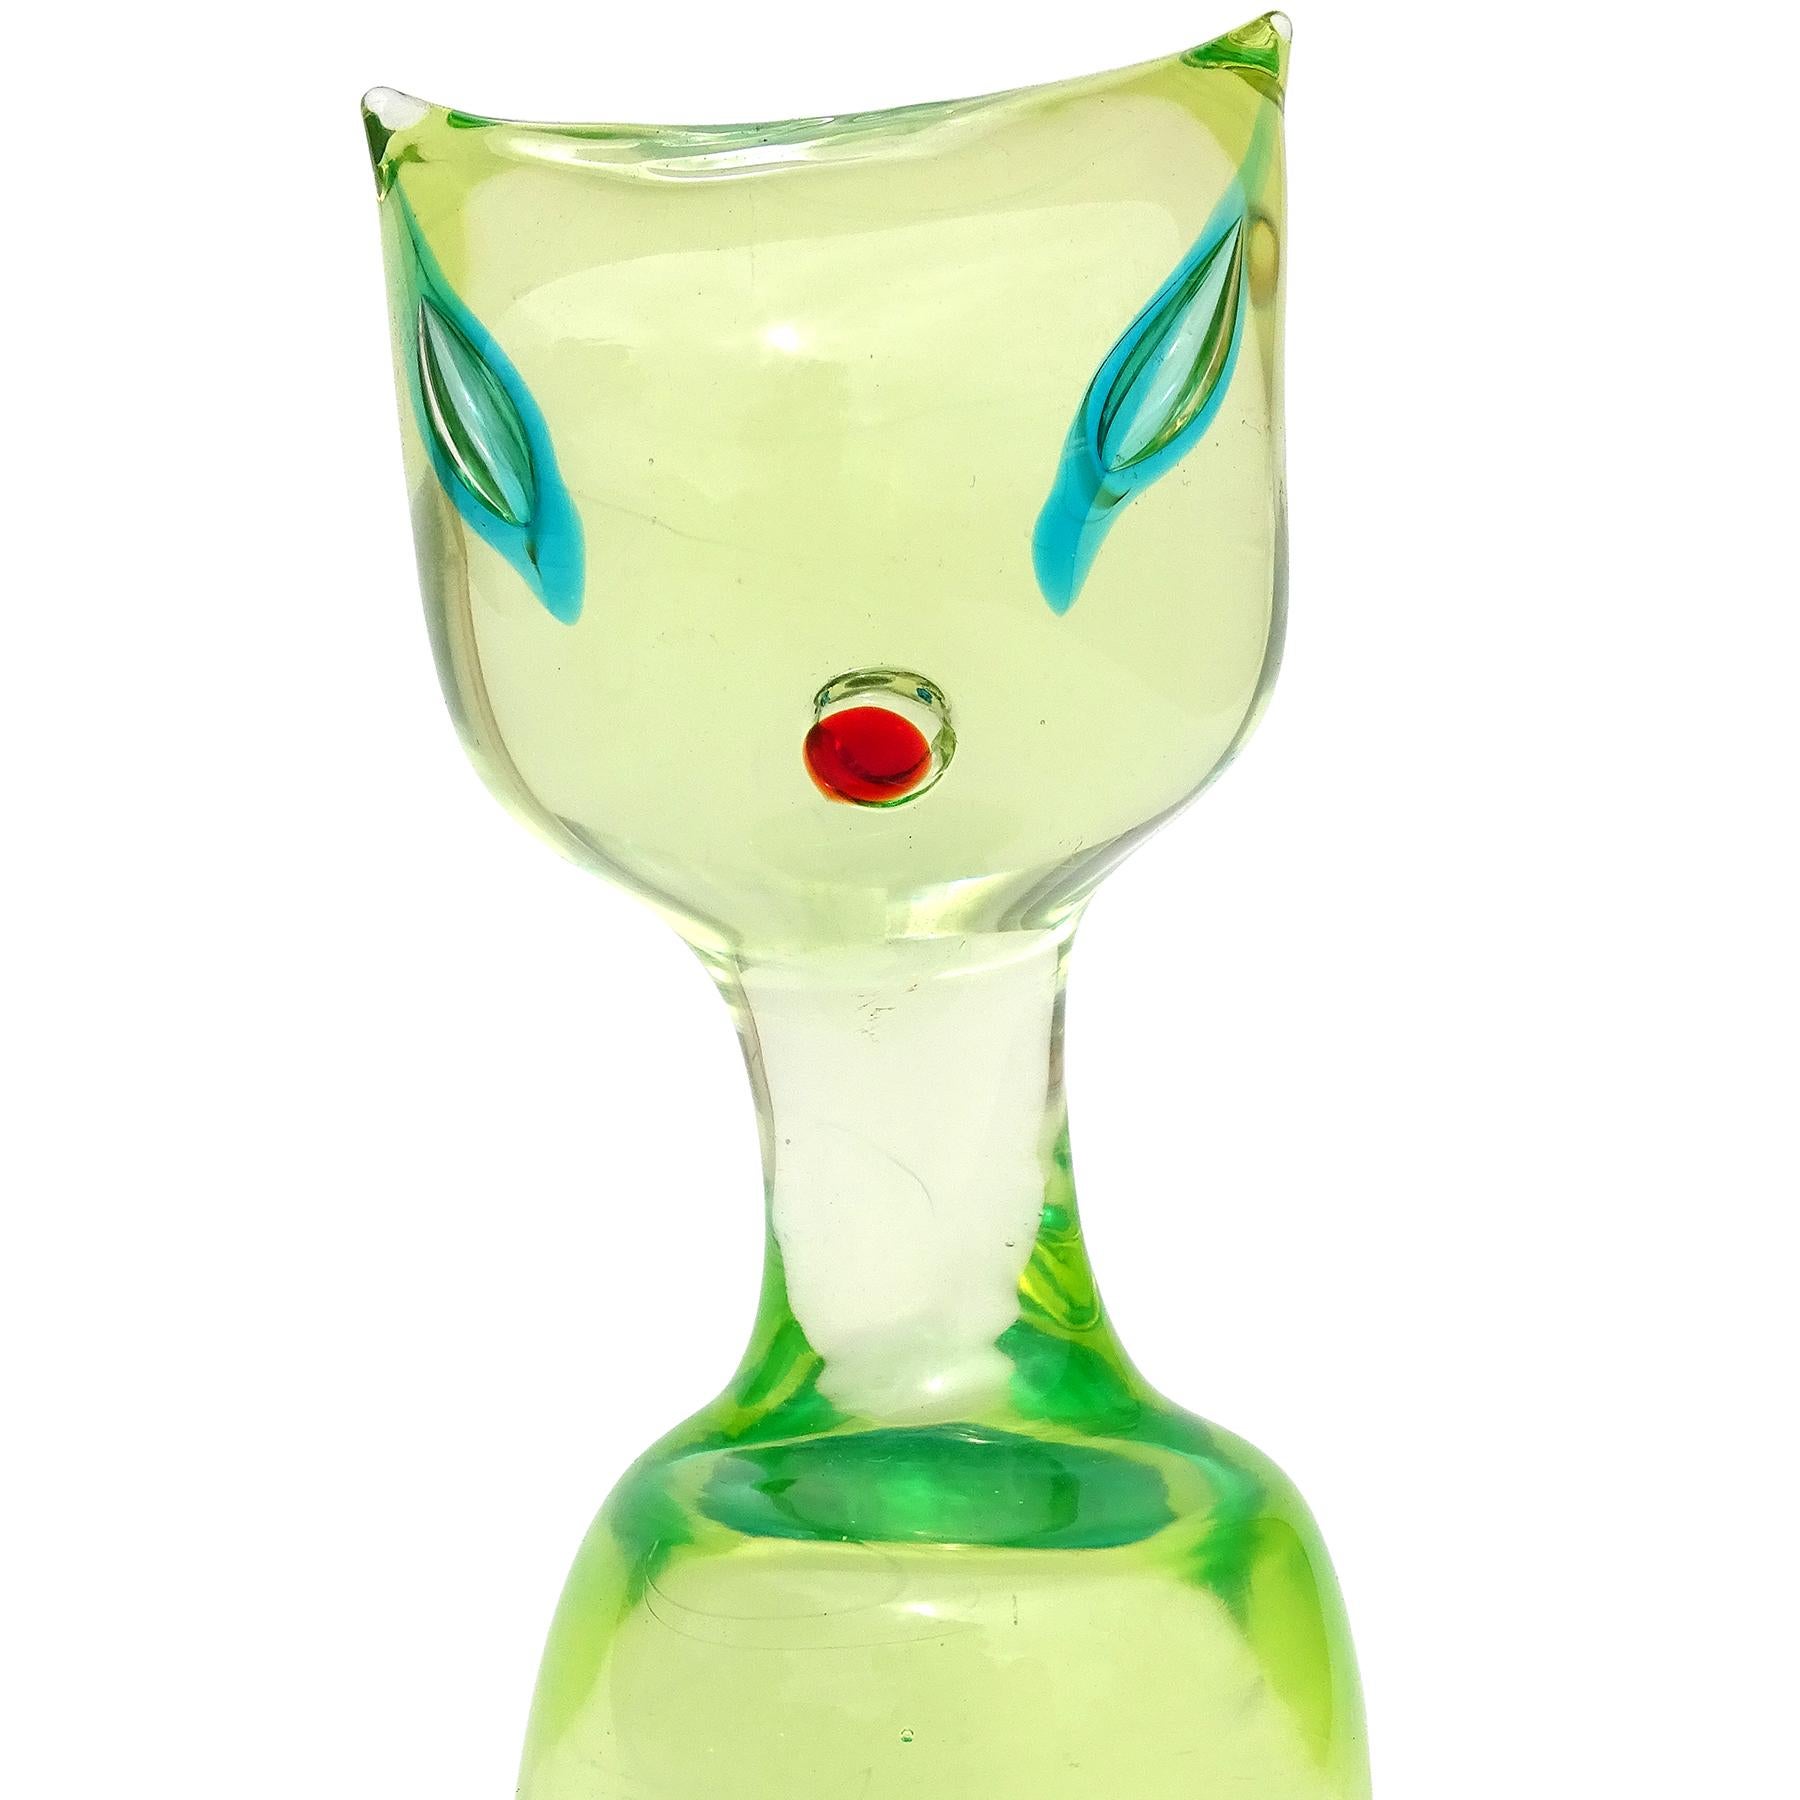 Beautiful and cute, vintage Murano hand blown Sommerso glowing Uranium yellow green with blue Italian art glass kitty cat figure / sculpture. The cat is documented to the Cenedese company, and attributed to designer Antonio da Ros. The cat an